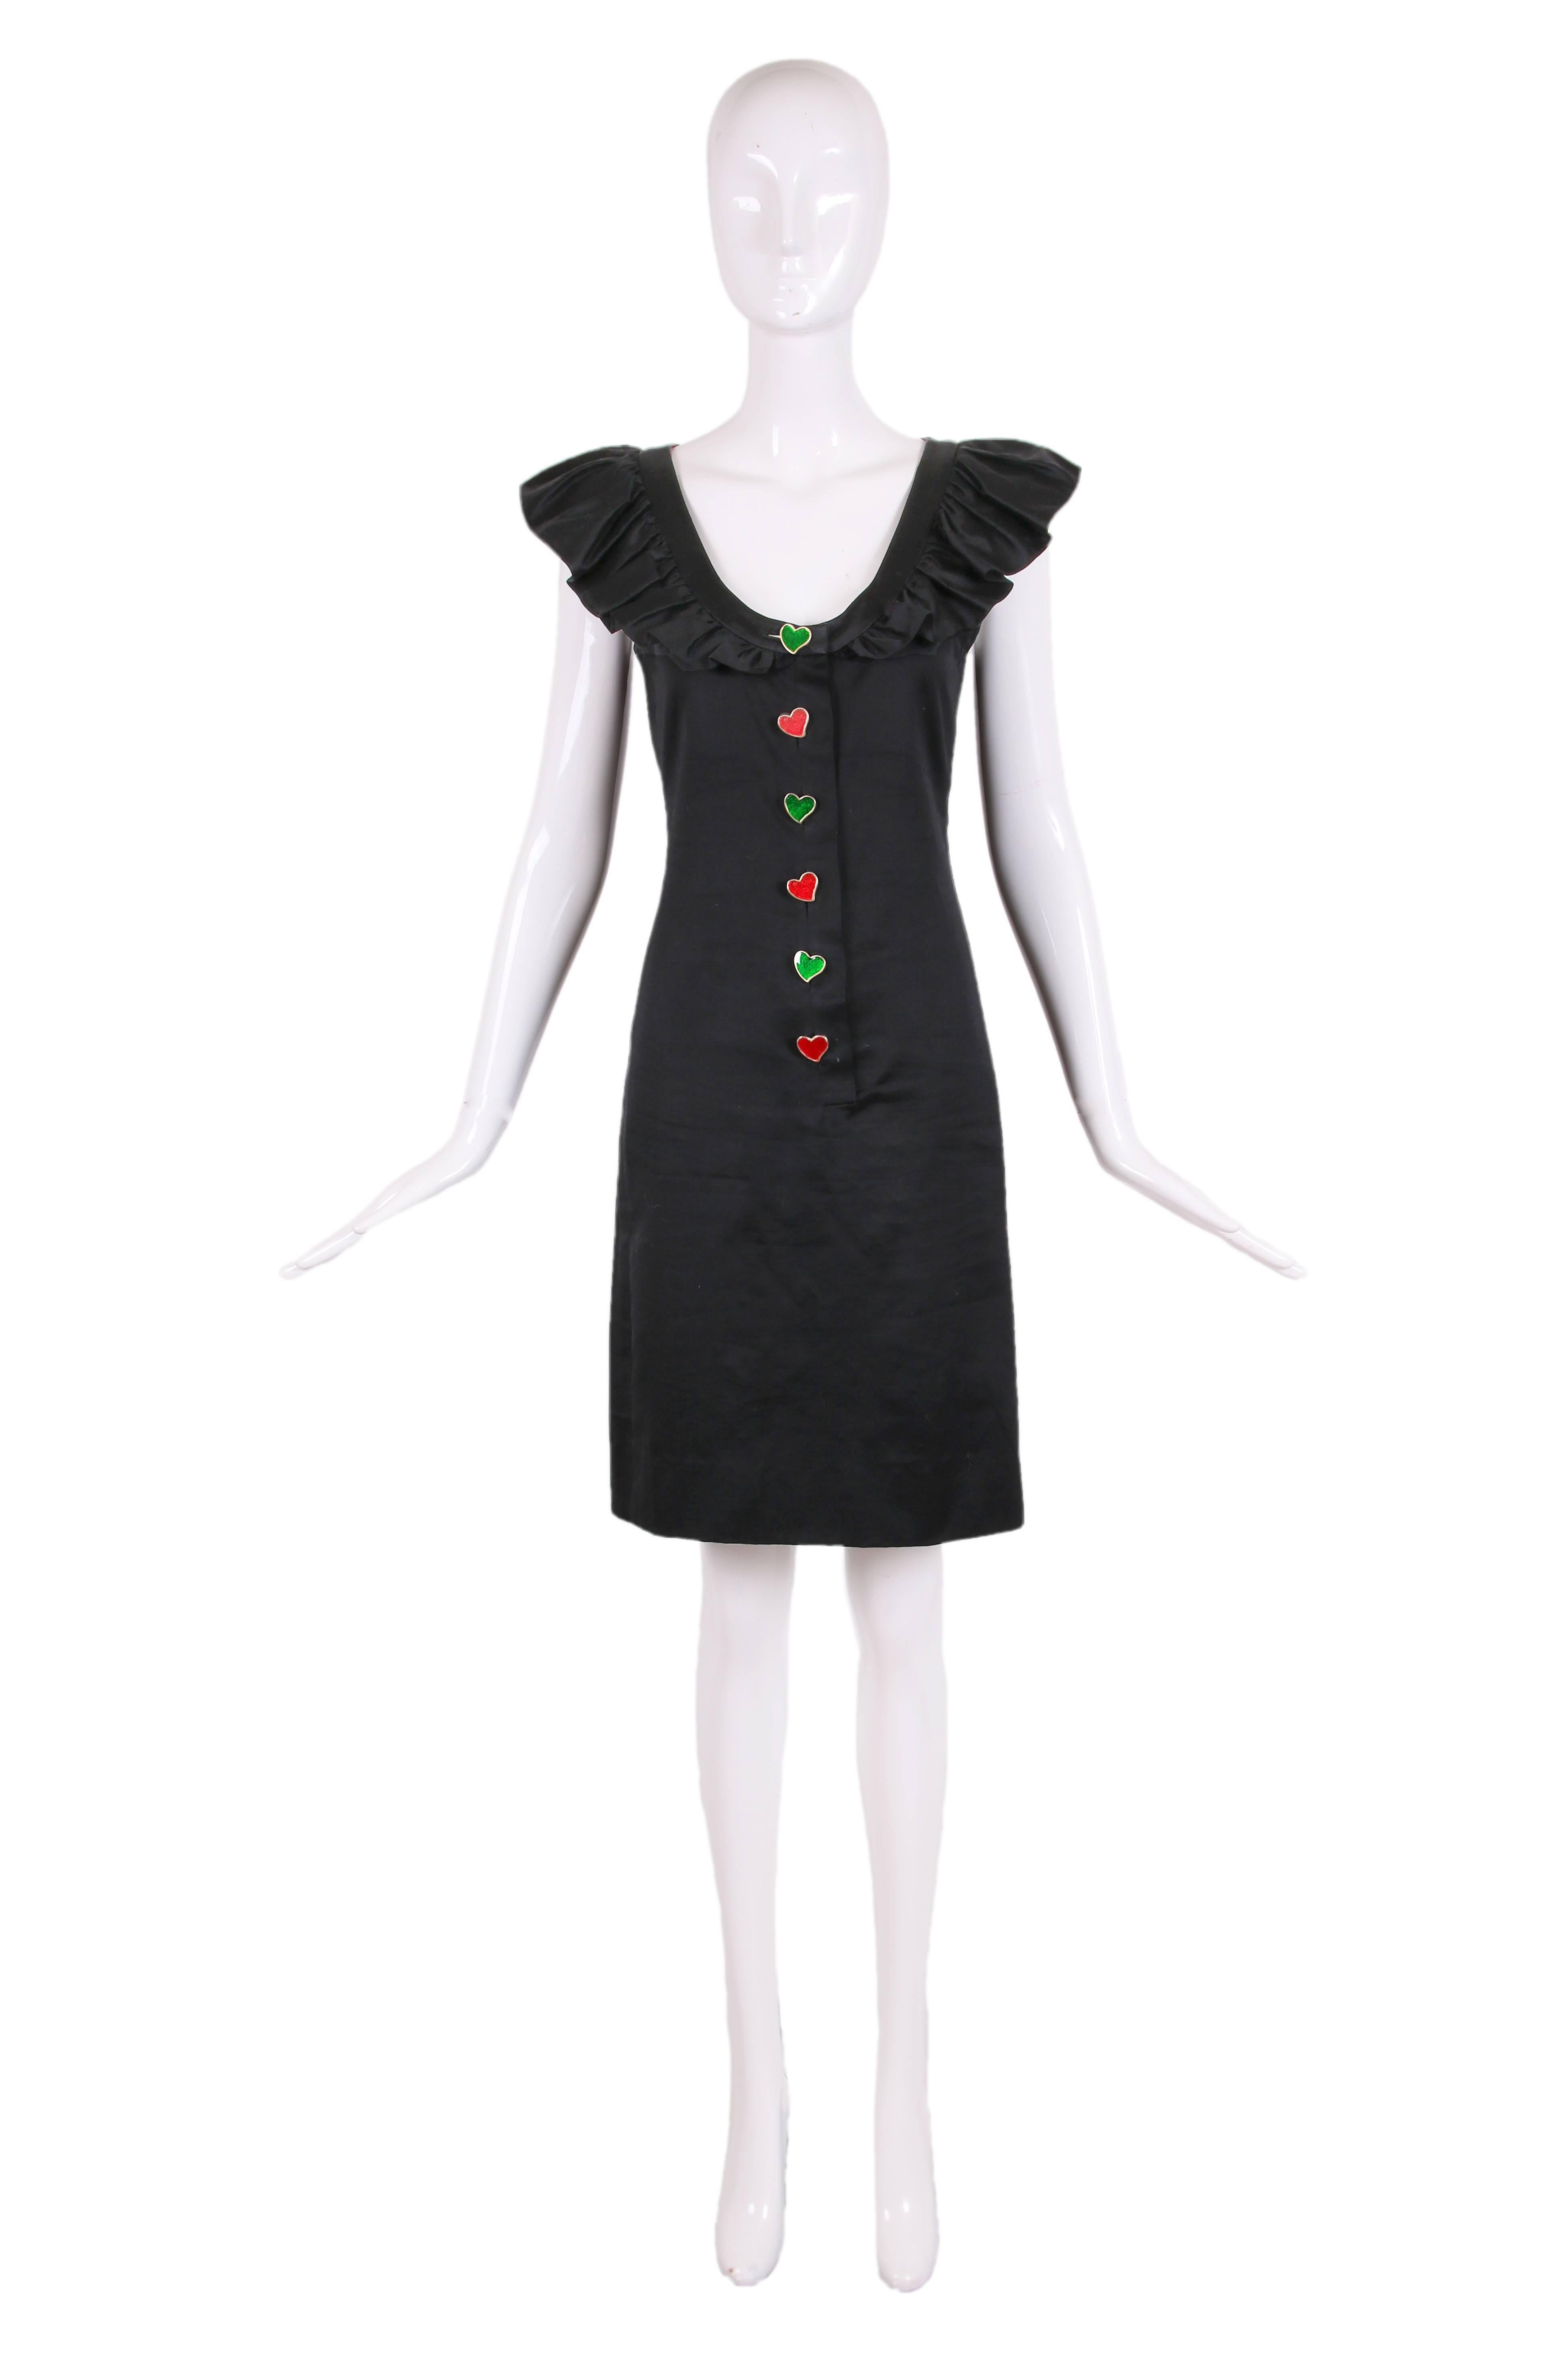 1990's Yves Saint Laurent black knee-length day dress with a ruffled neckline and metal heart-shaped button closures at bodice front - please see original AD in the photo selection for this item. The buttons alternate between sparkling/metallic red